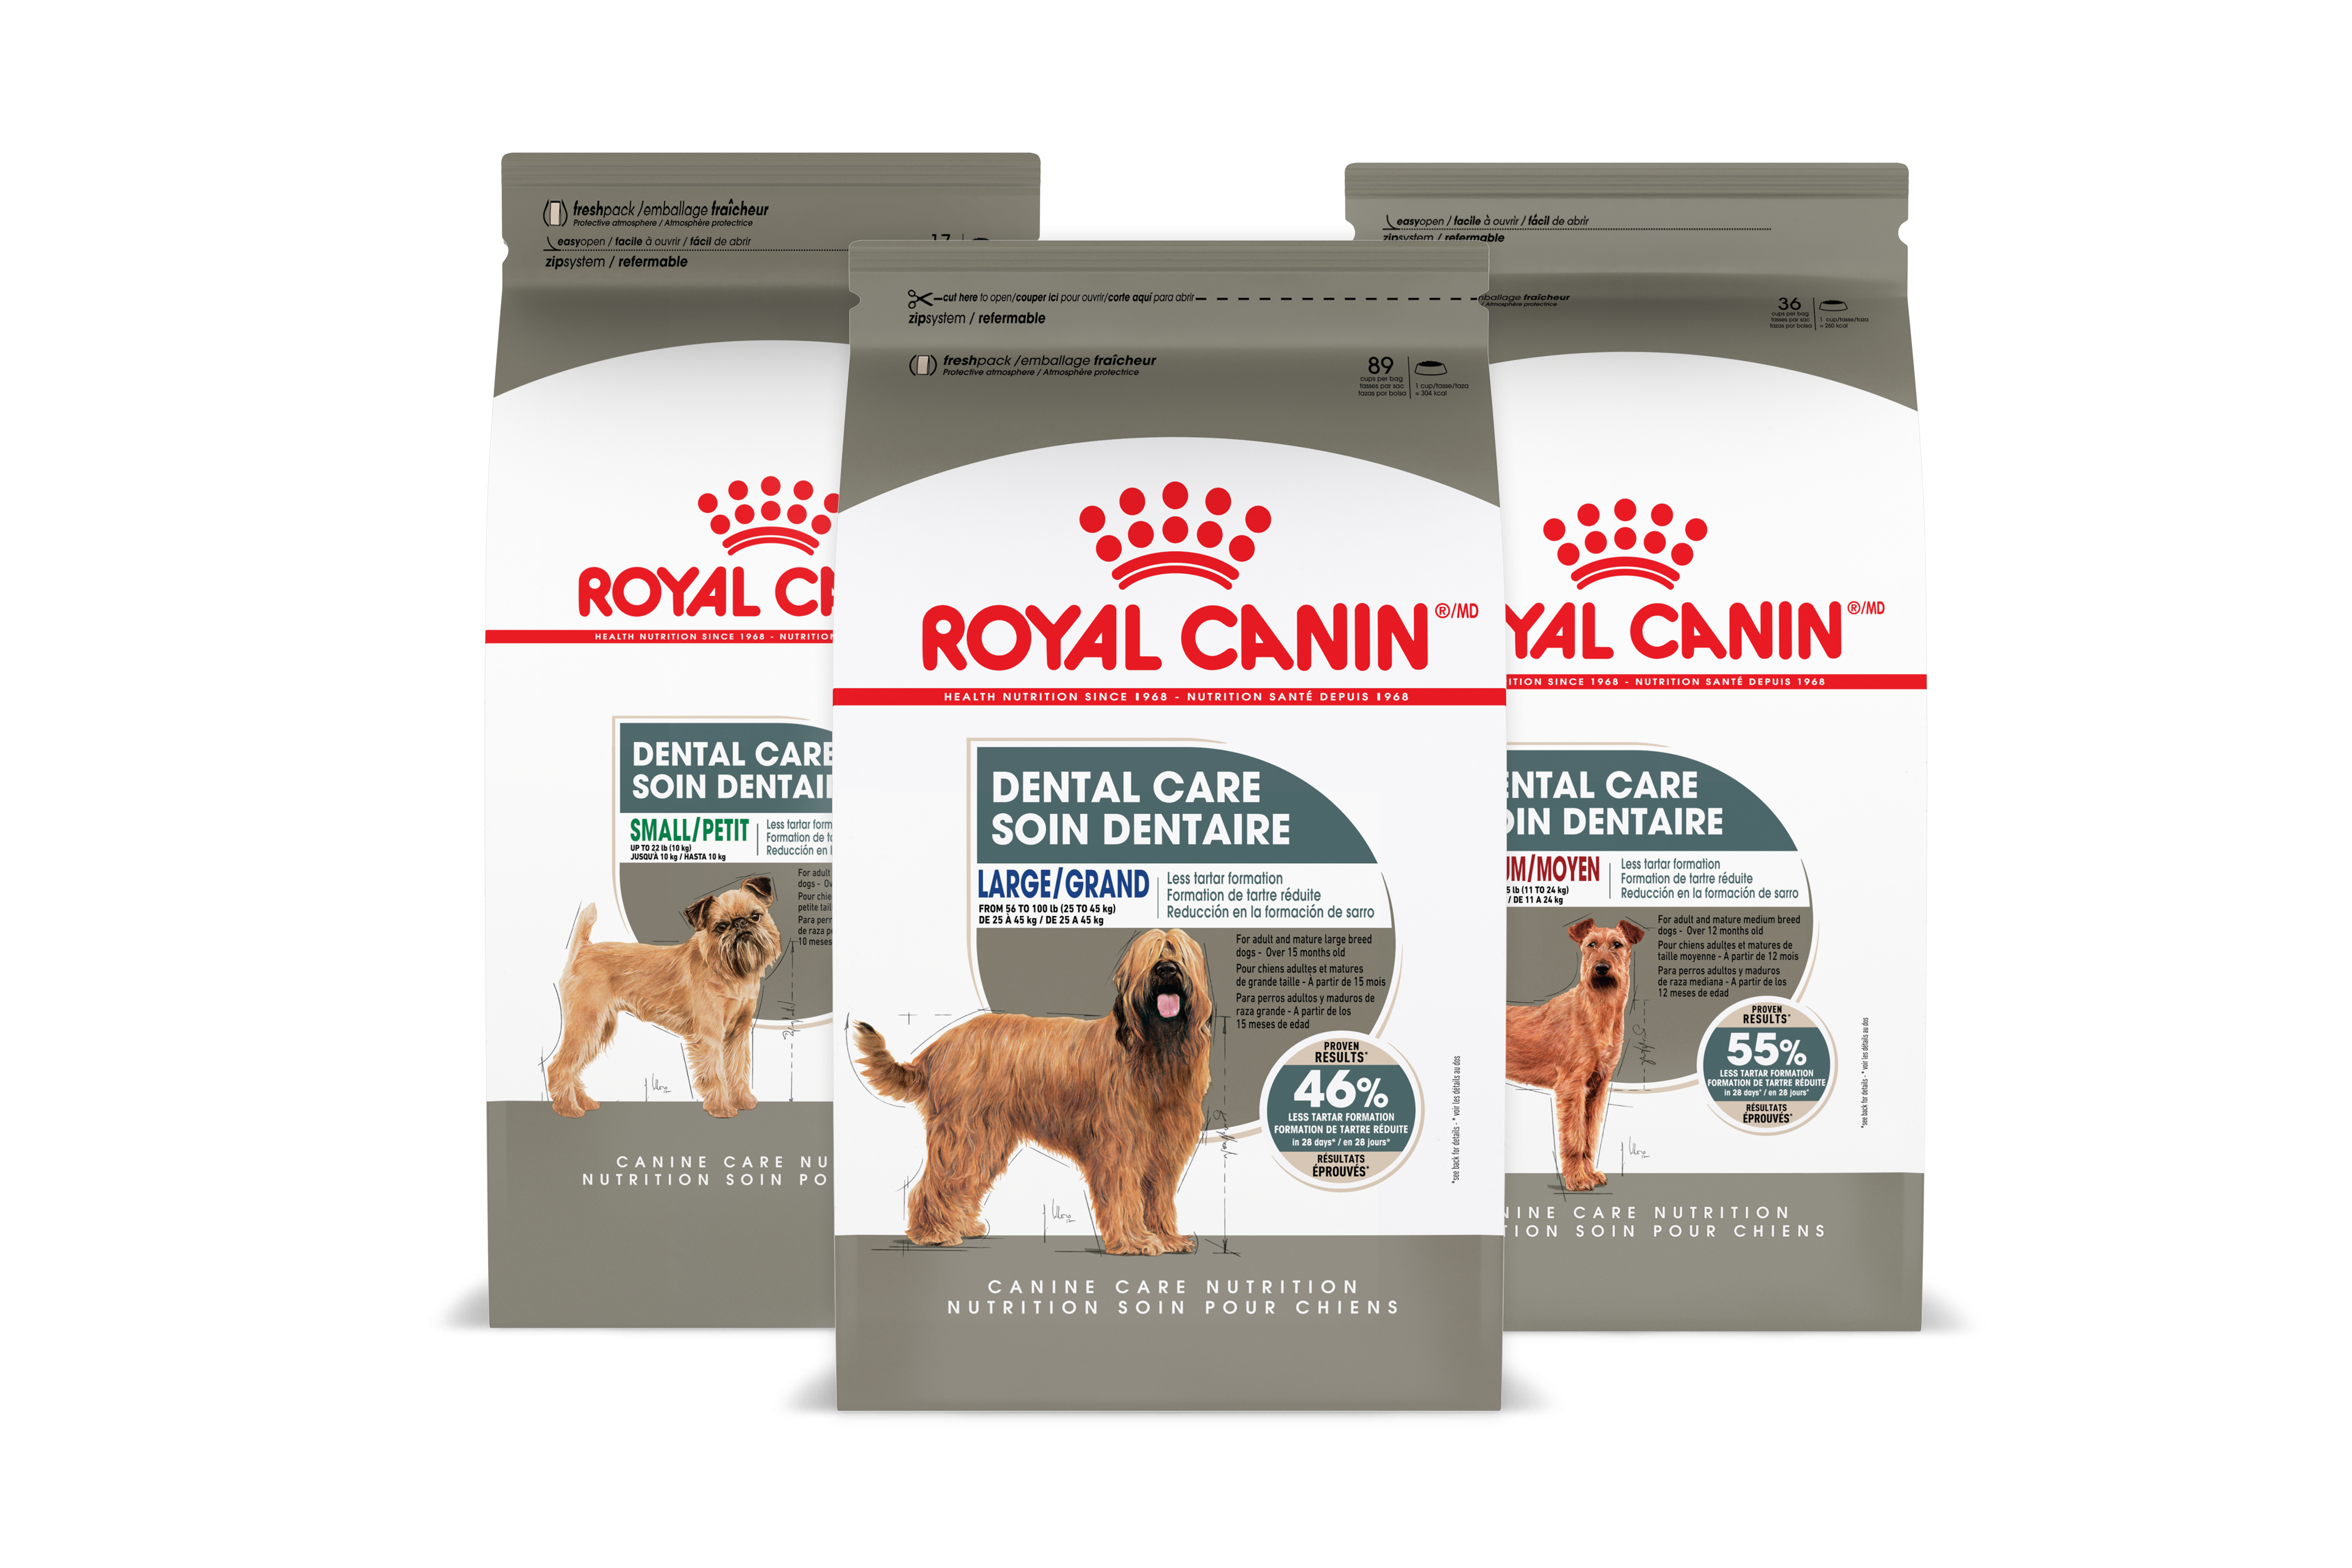 Royal Canin Dental Care Range of Products